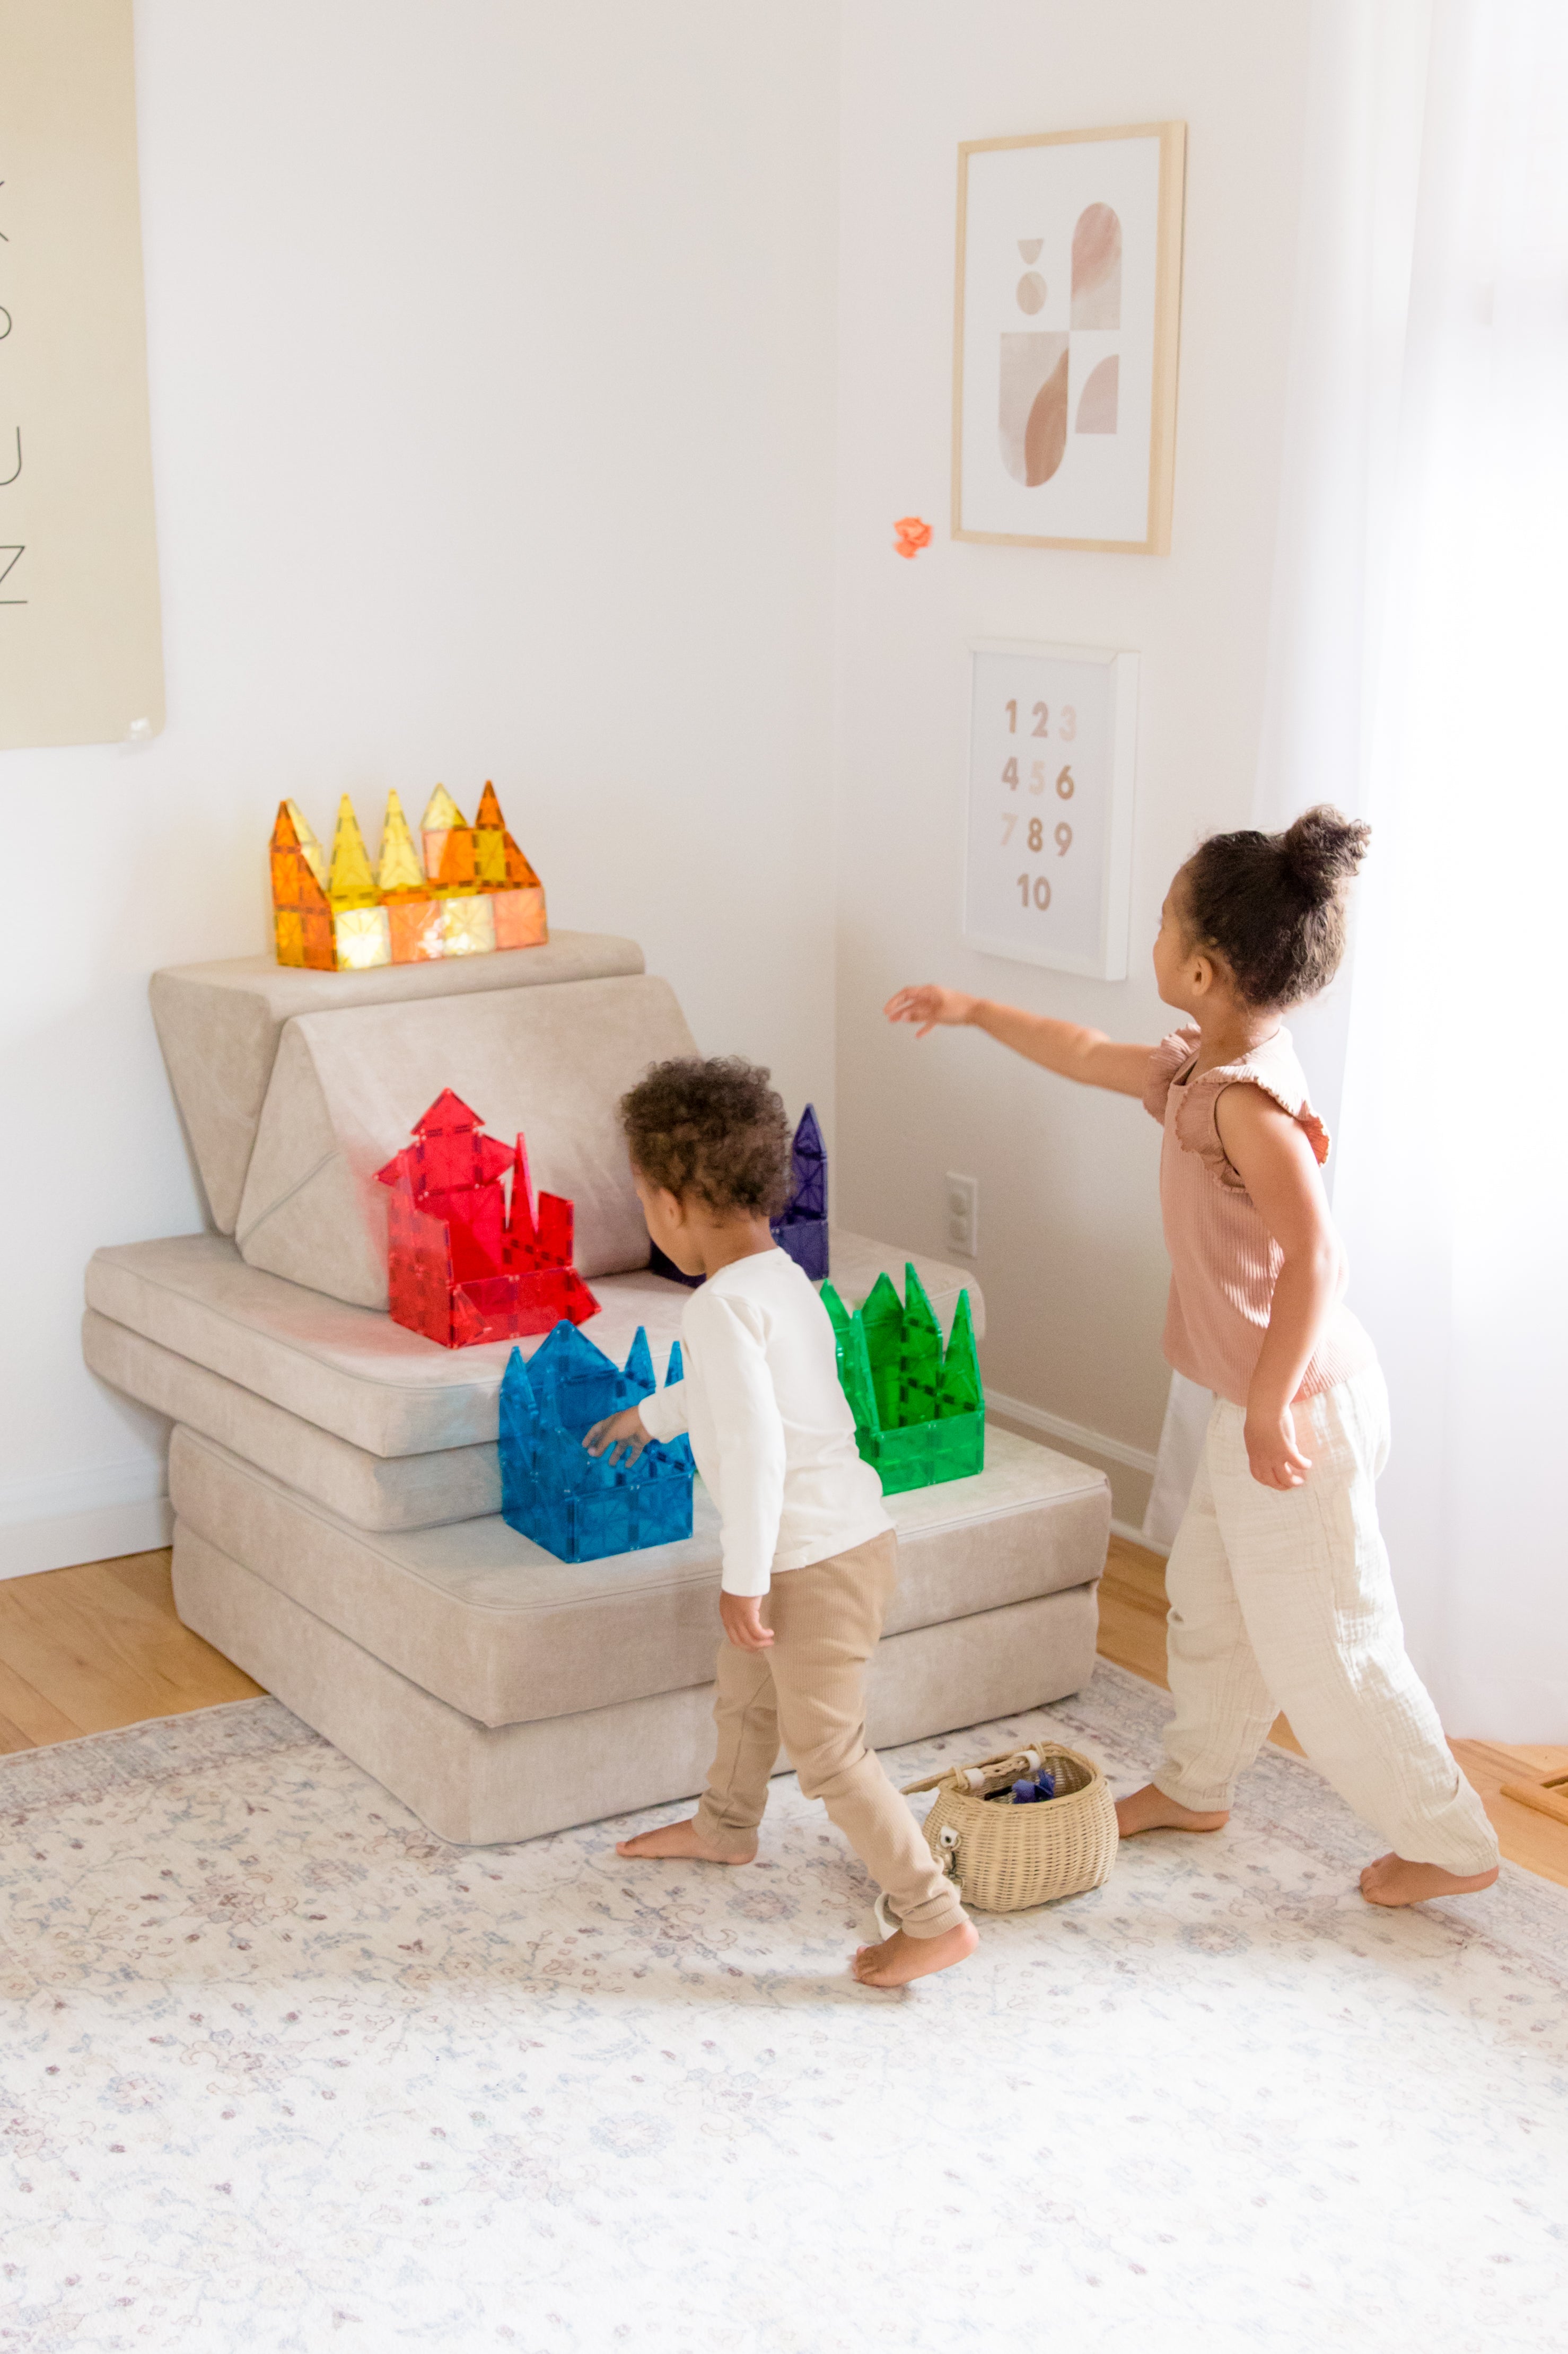 The No. 1 Toy in Our House: 10 Ways My Kids Play With Magnetic